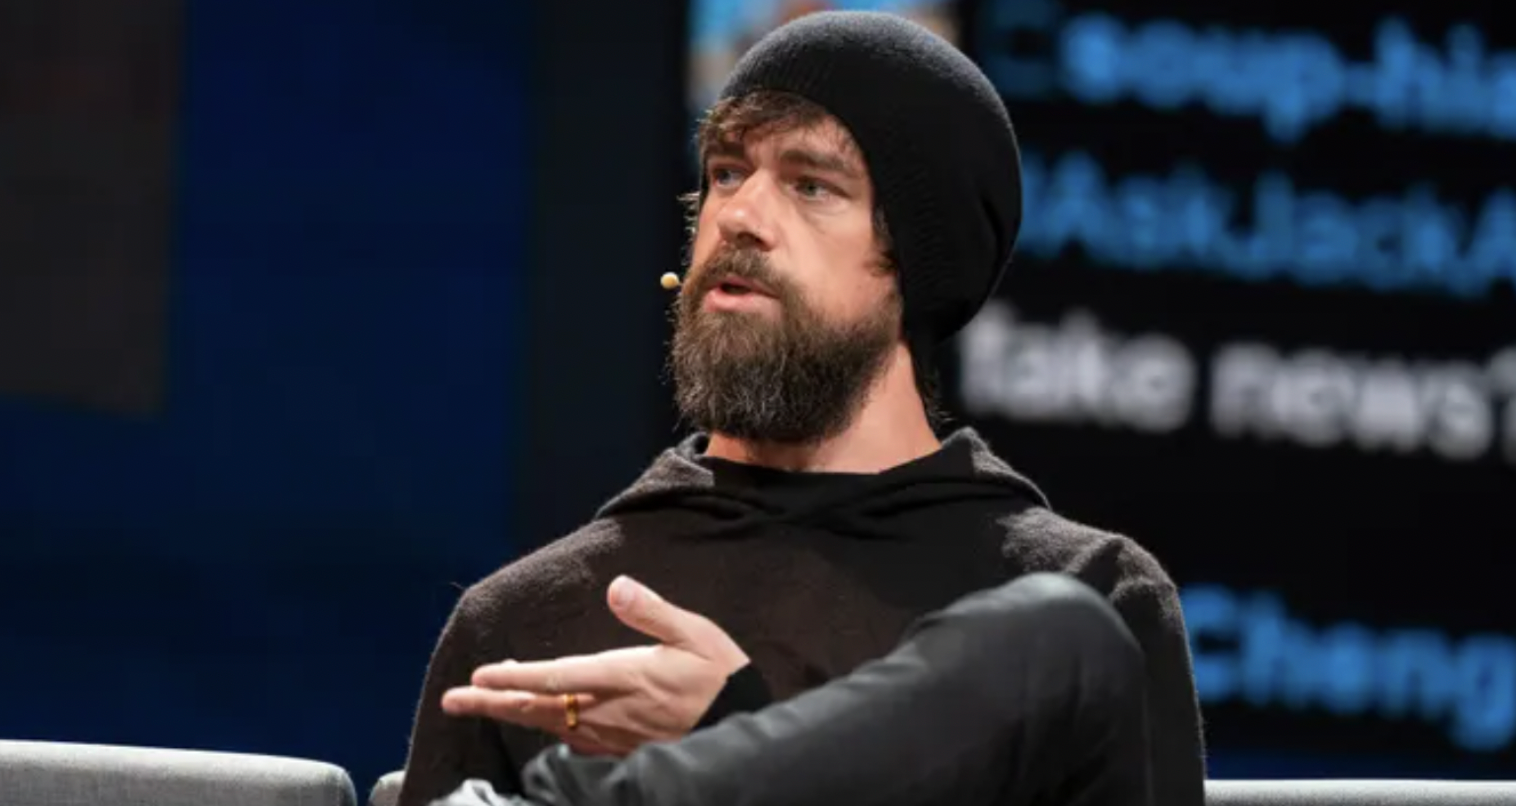 Twitter Co-Founder Jack Dorsey Apologizes For Layoffs: 'I Grew The Company Size Too Quickly'